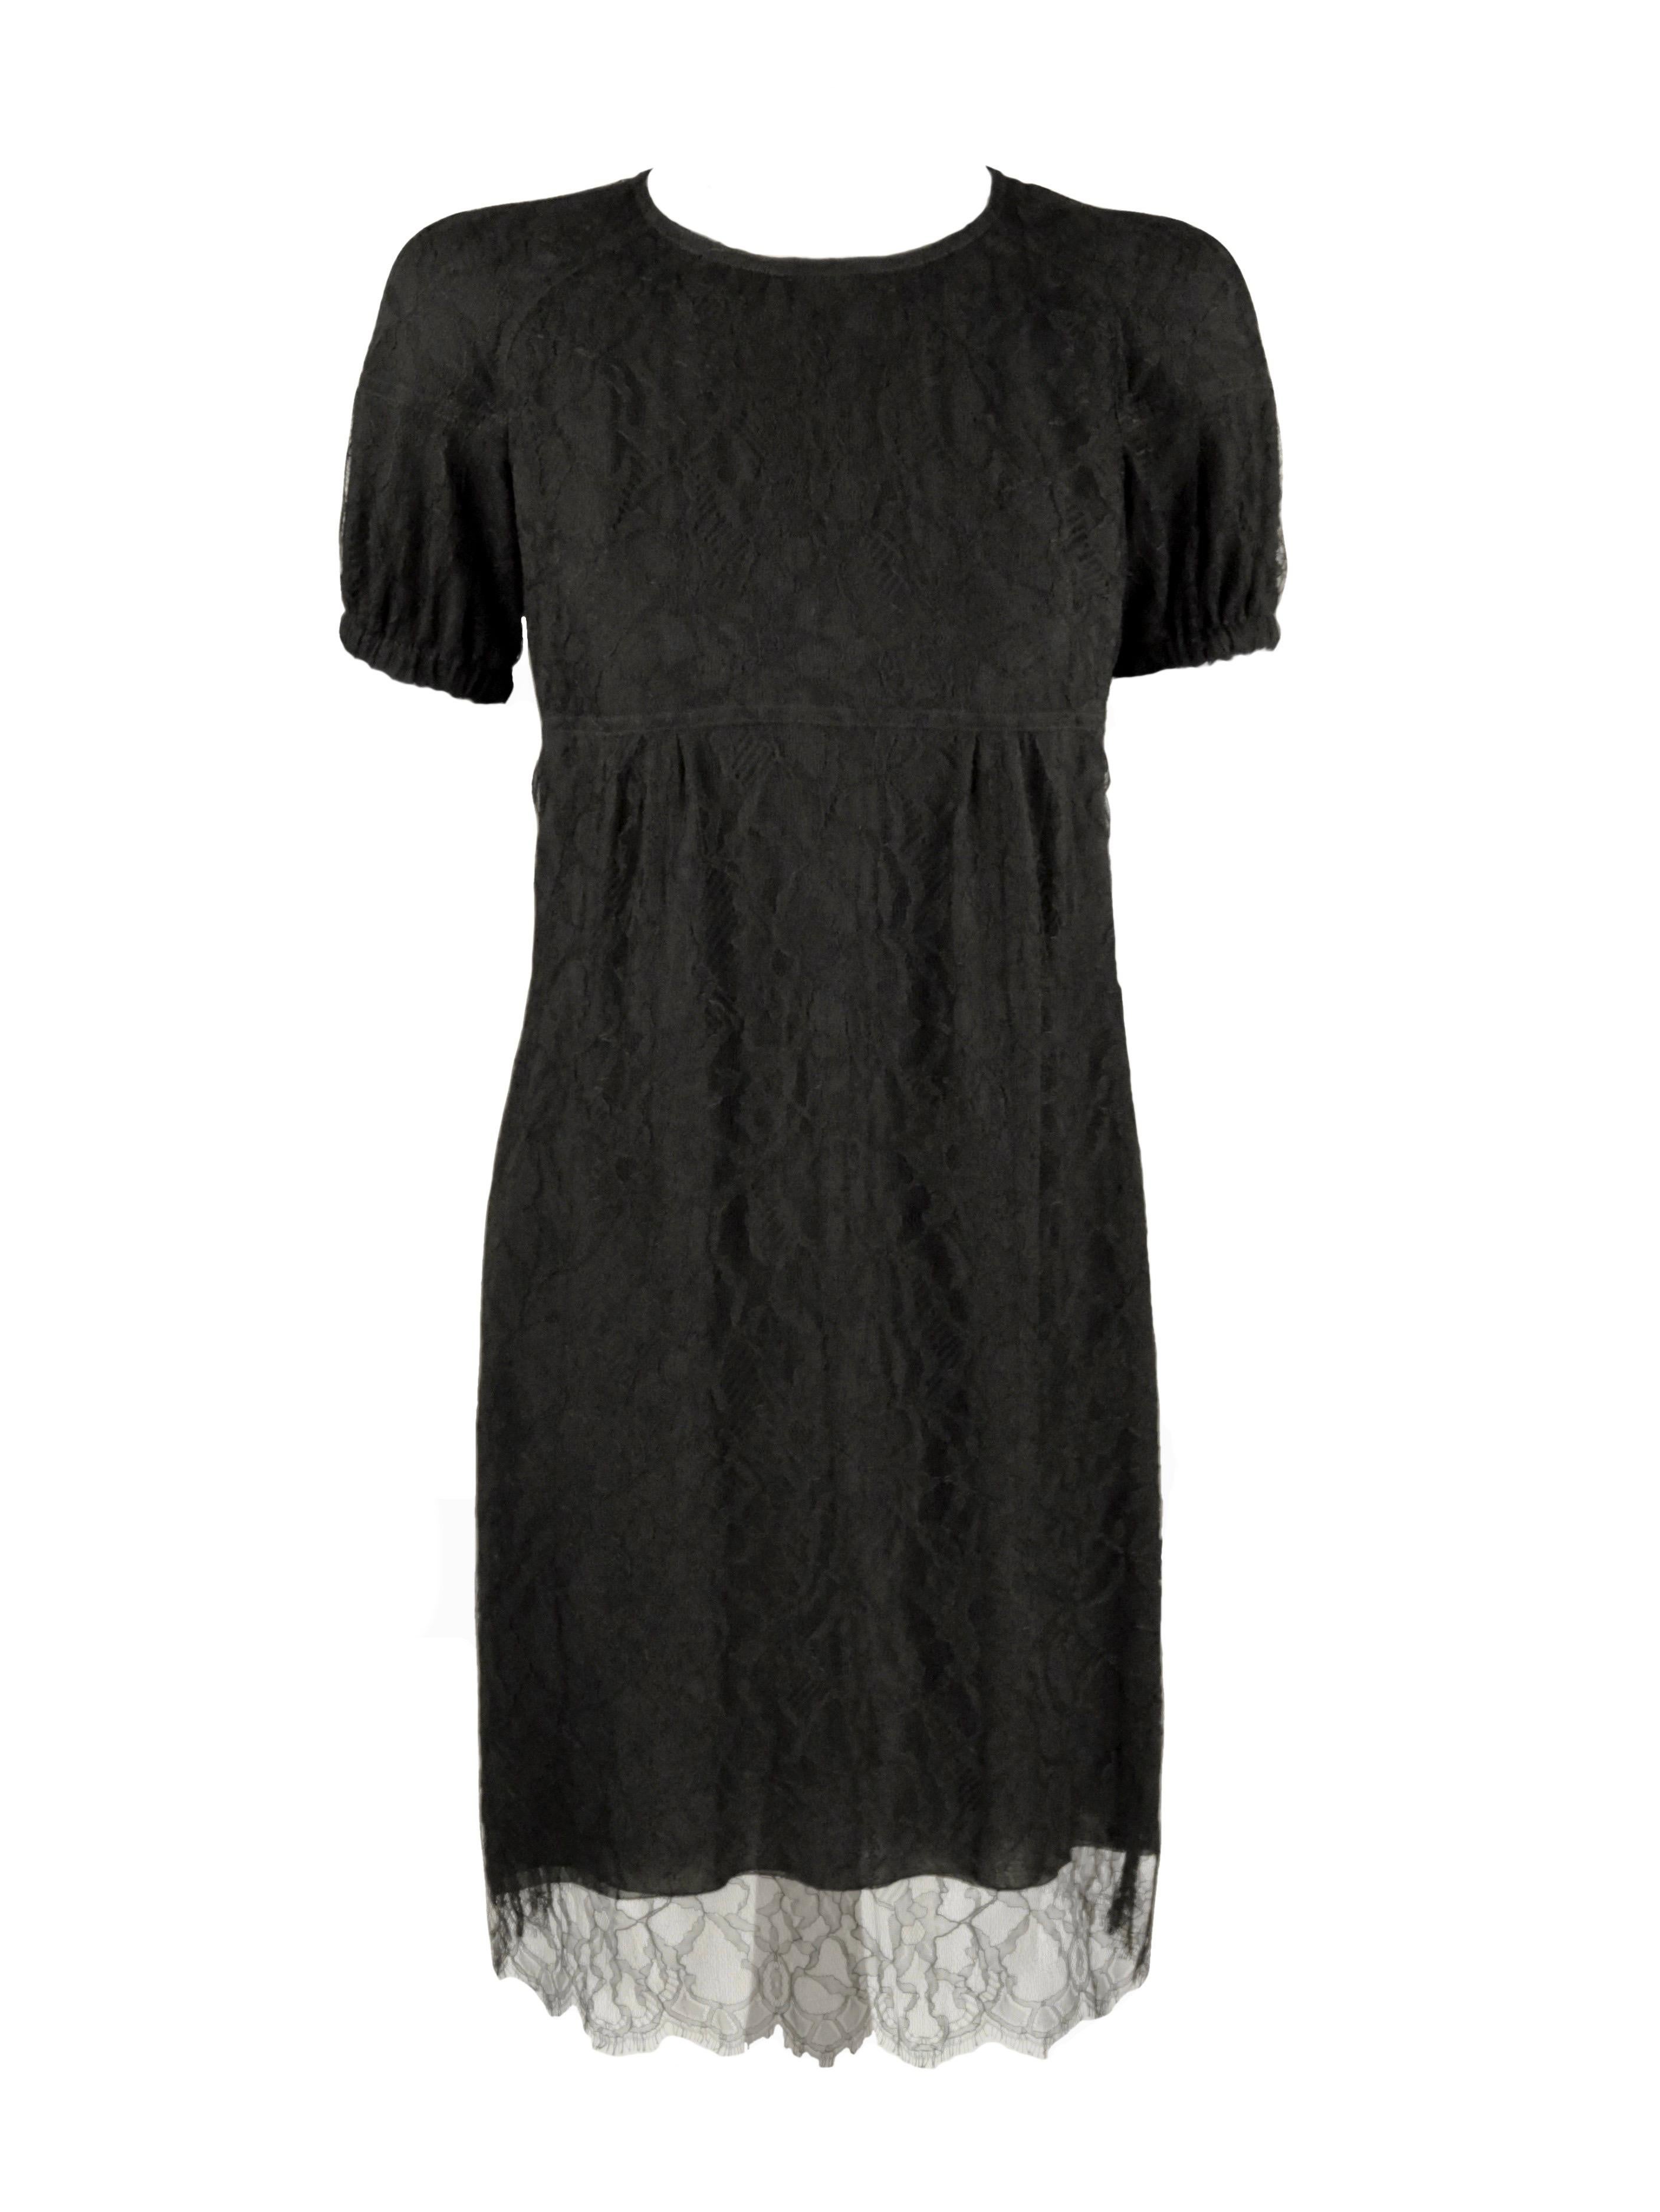 Burberry black lace dress
In Chantilly lace, very light and soft to the touch.
Empire style, short puff sleeves.
Zipper on the back.
Silk lining
Size IT 40
Flat measures:
Length cm. 94
Shuolders cm. 36
Bust cm. 42
Slevees cm. 24
Excellent conditions